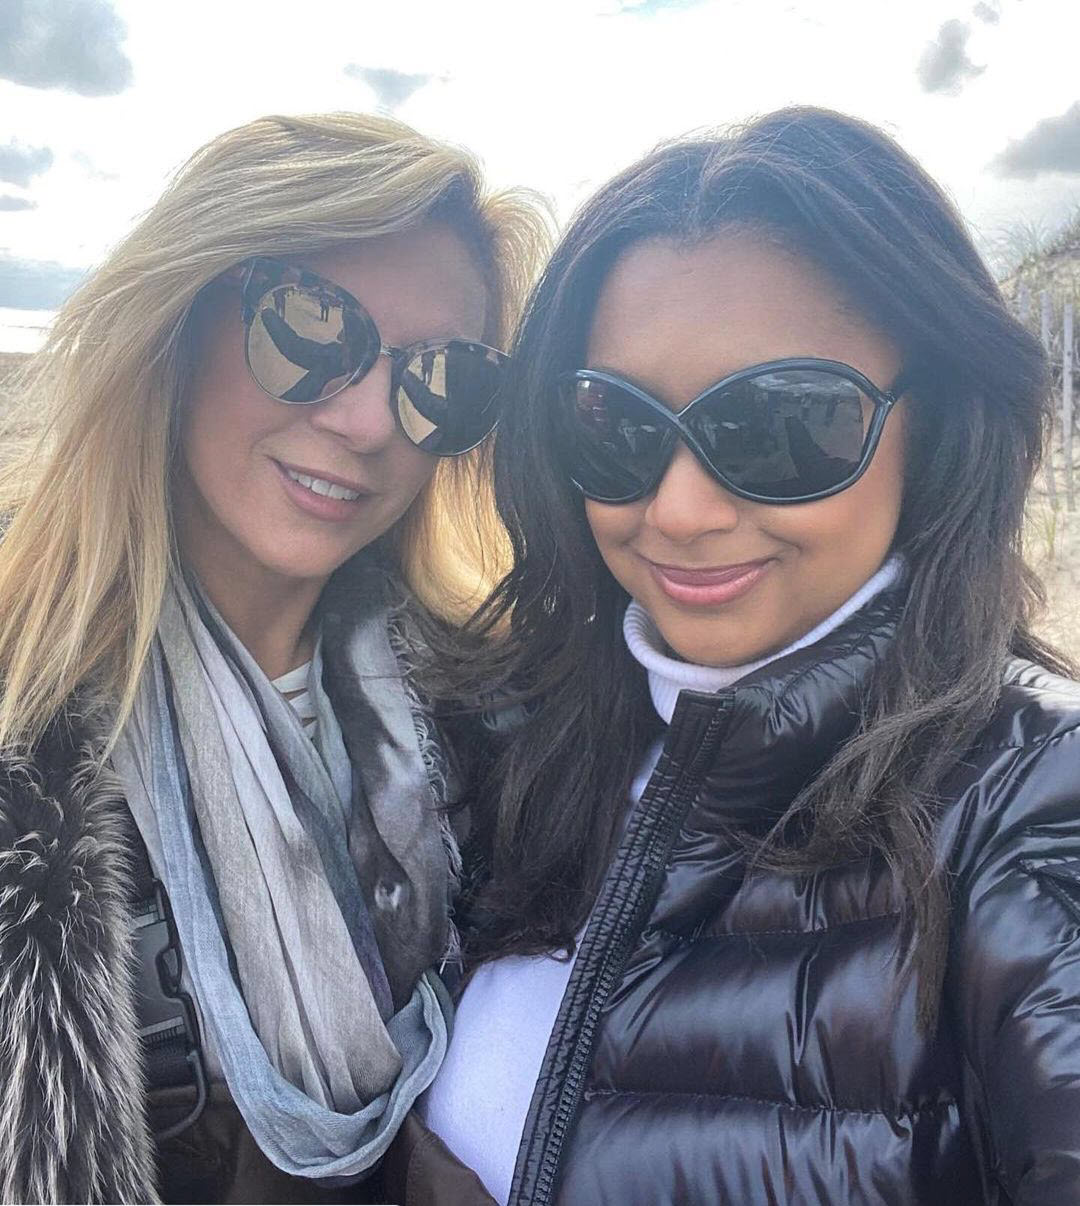 New RHONY Star Eboni K. Williams Reveals Which Housewives Shes Bonded With